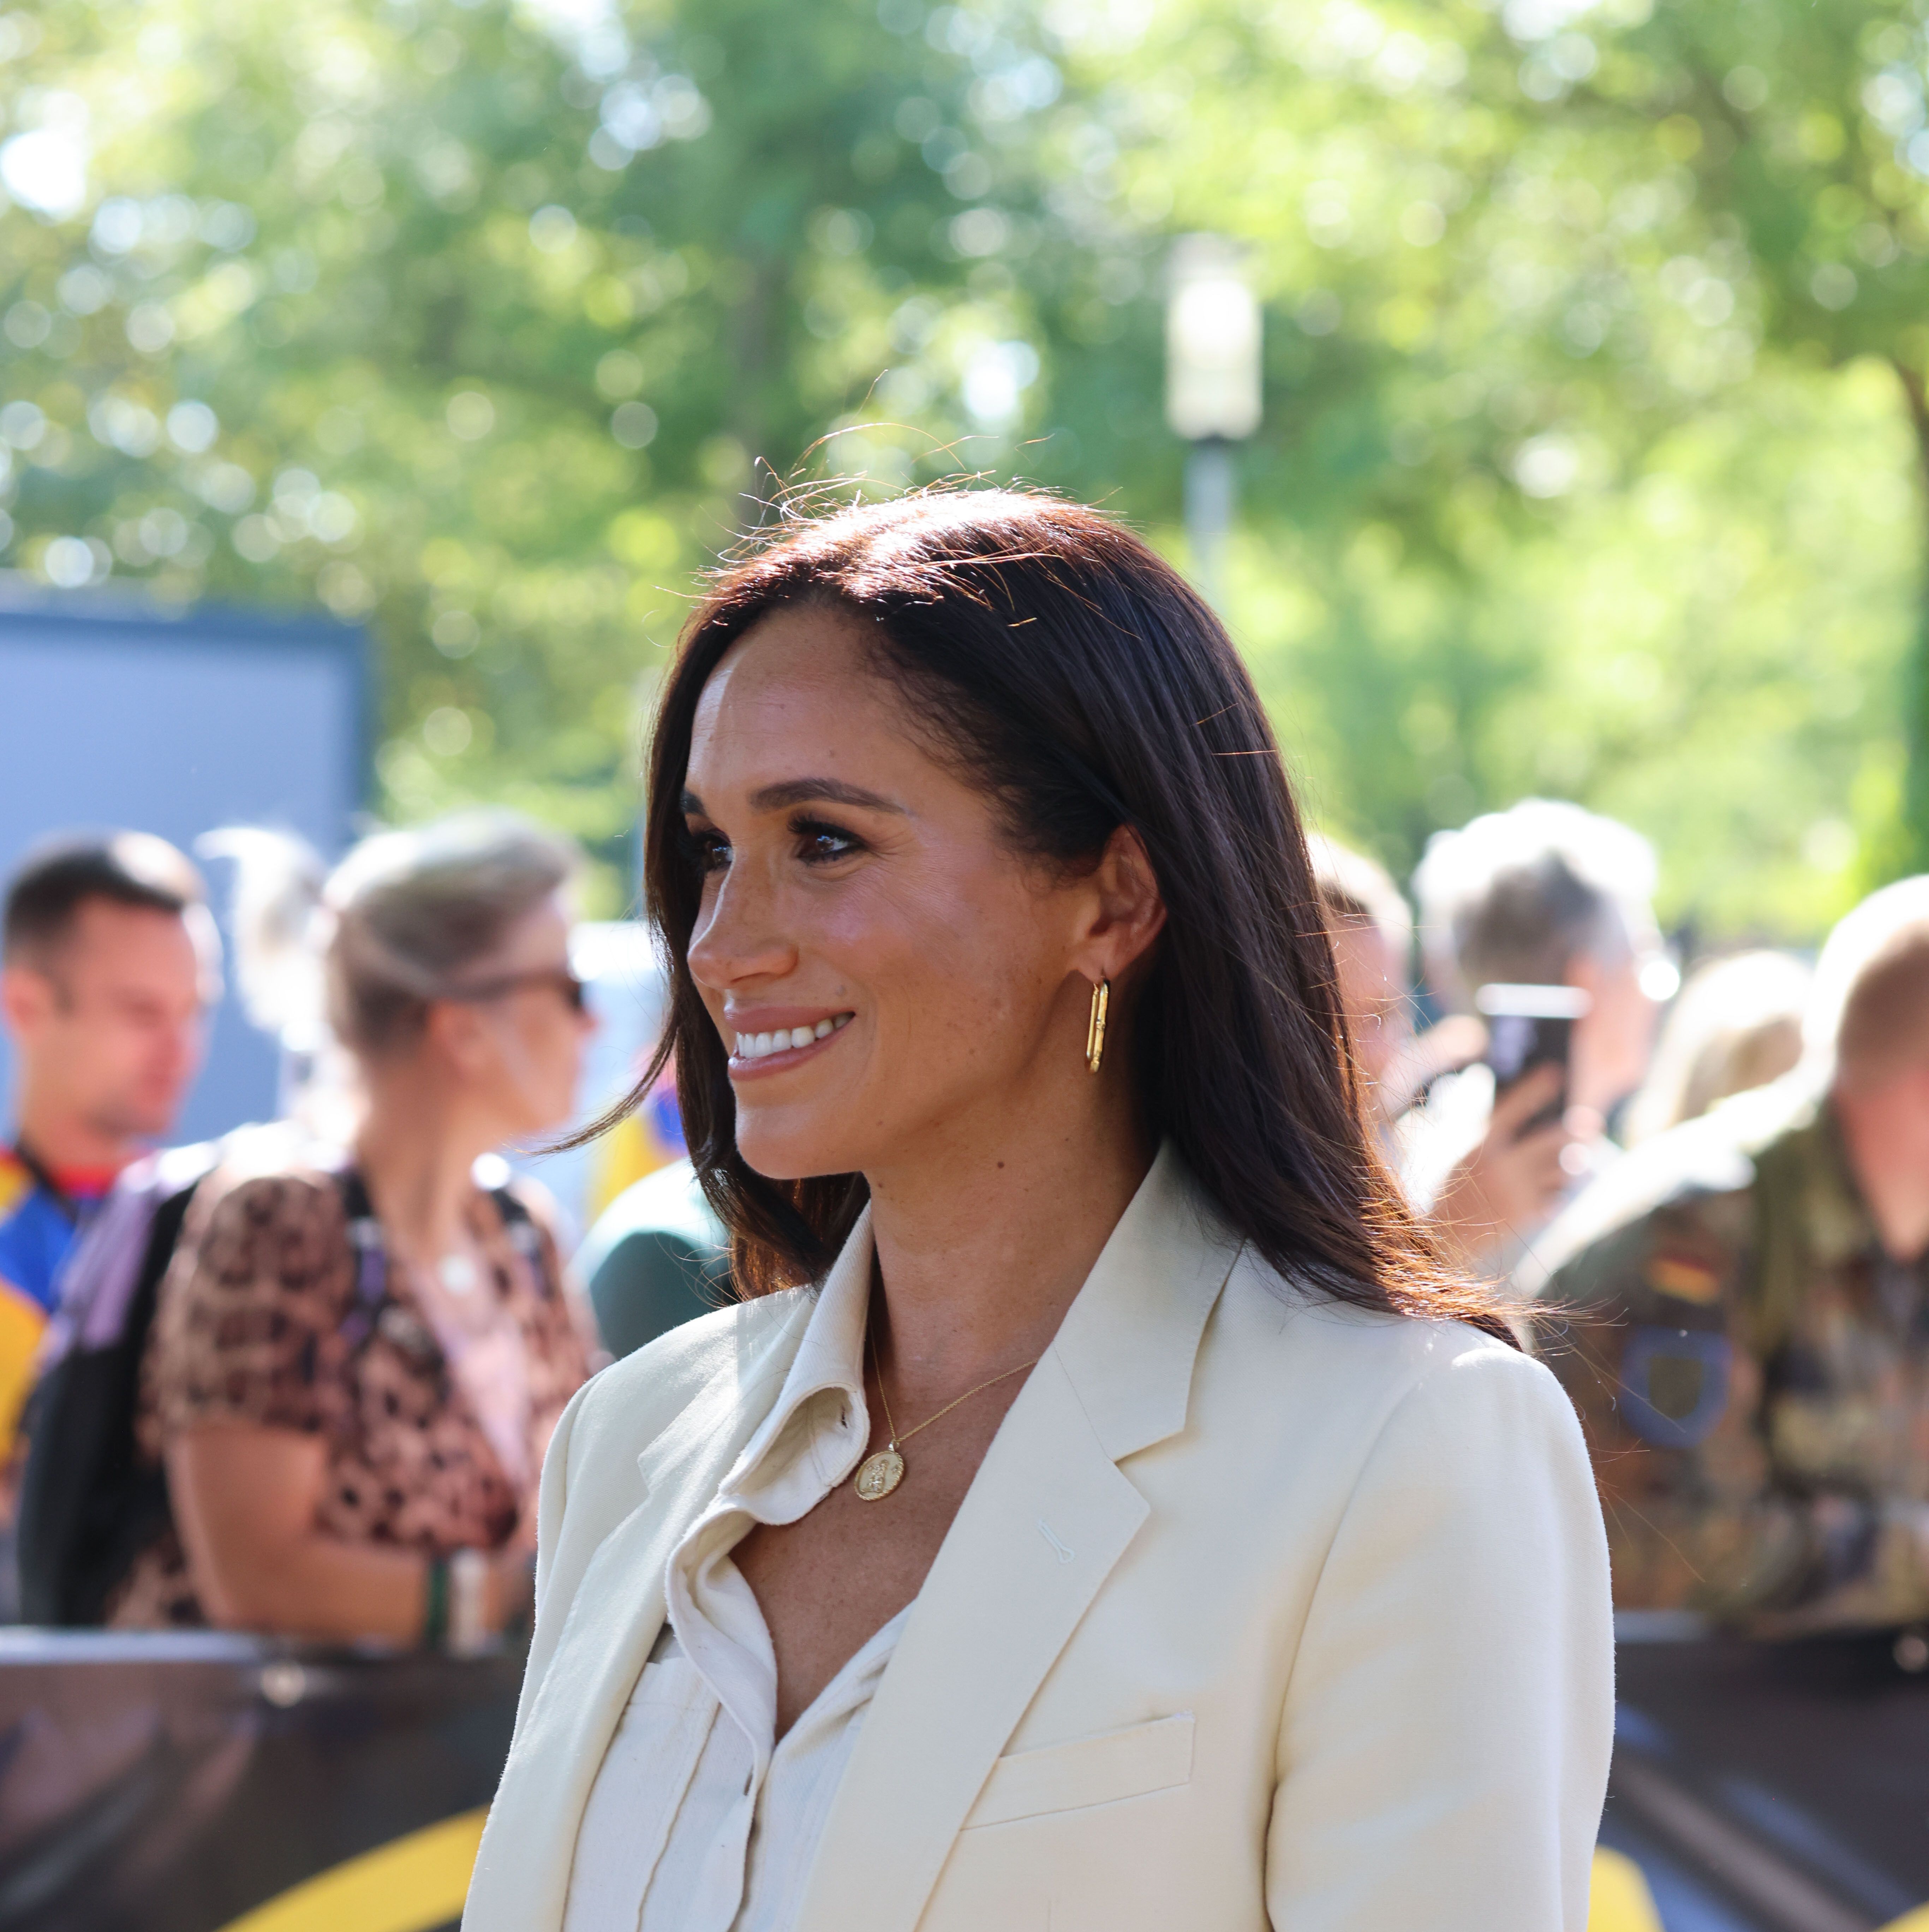 A source spoke out about Meghan's career plans hours before a candid photo of her out in Los Angeles was released.